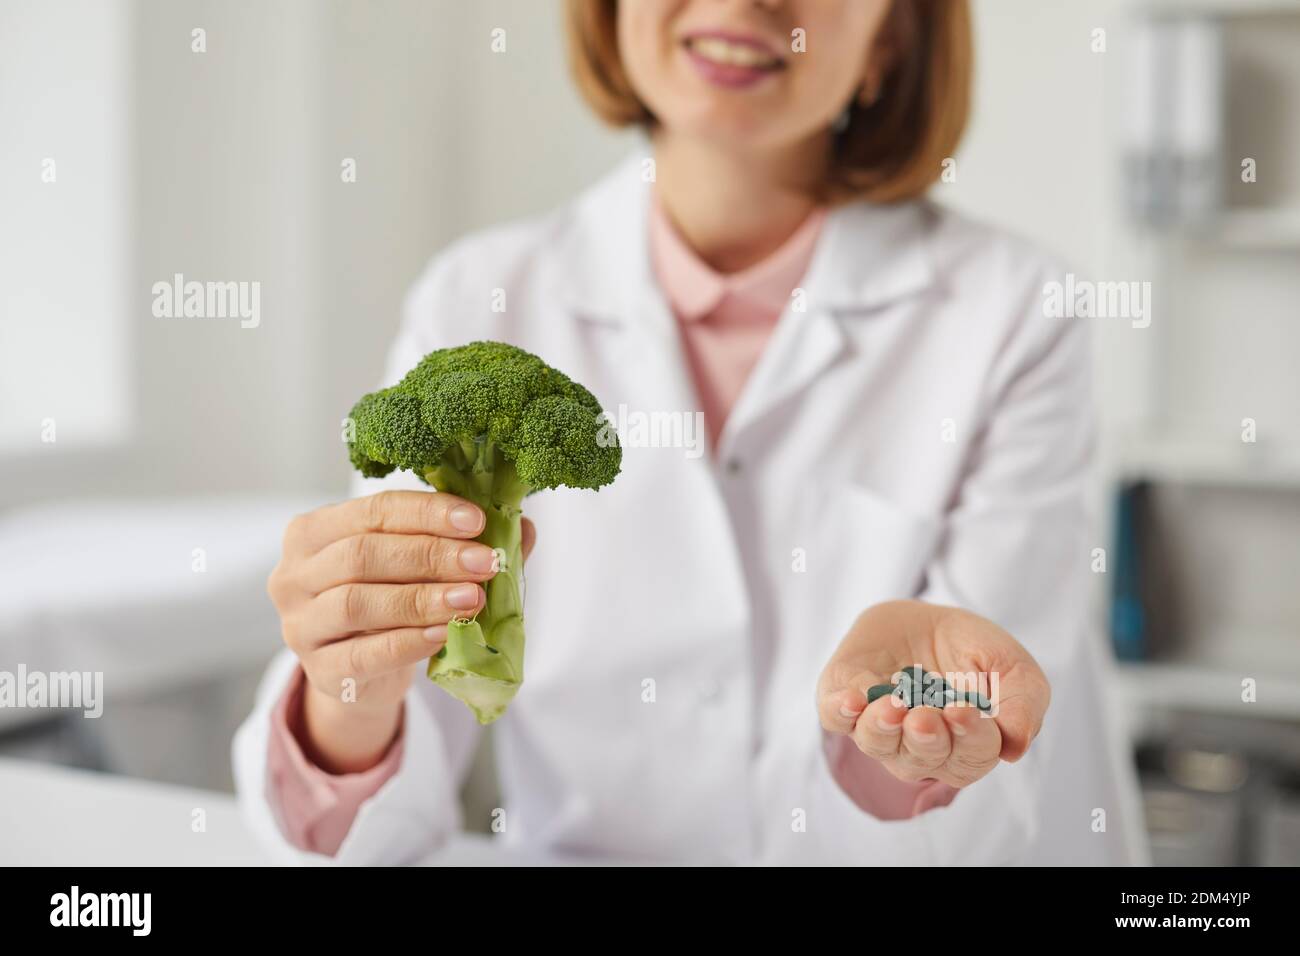 Dietitian or nutritionist recommends eating raw vegetables and taking food supplements Stock Photo